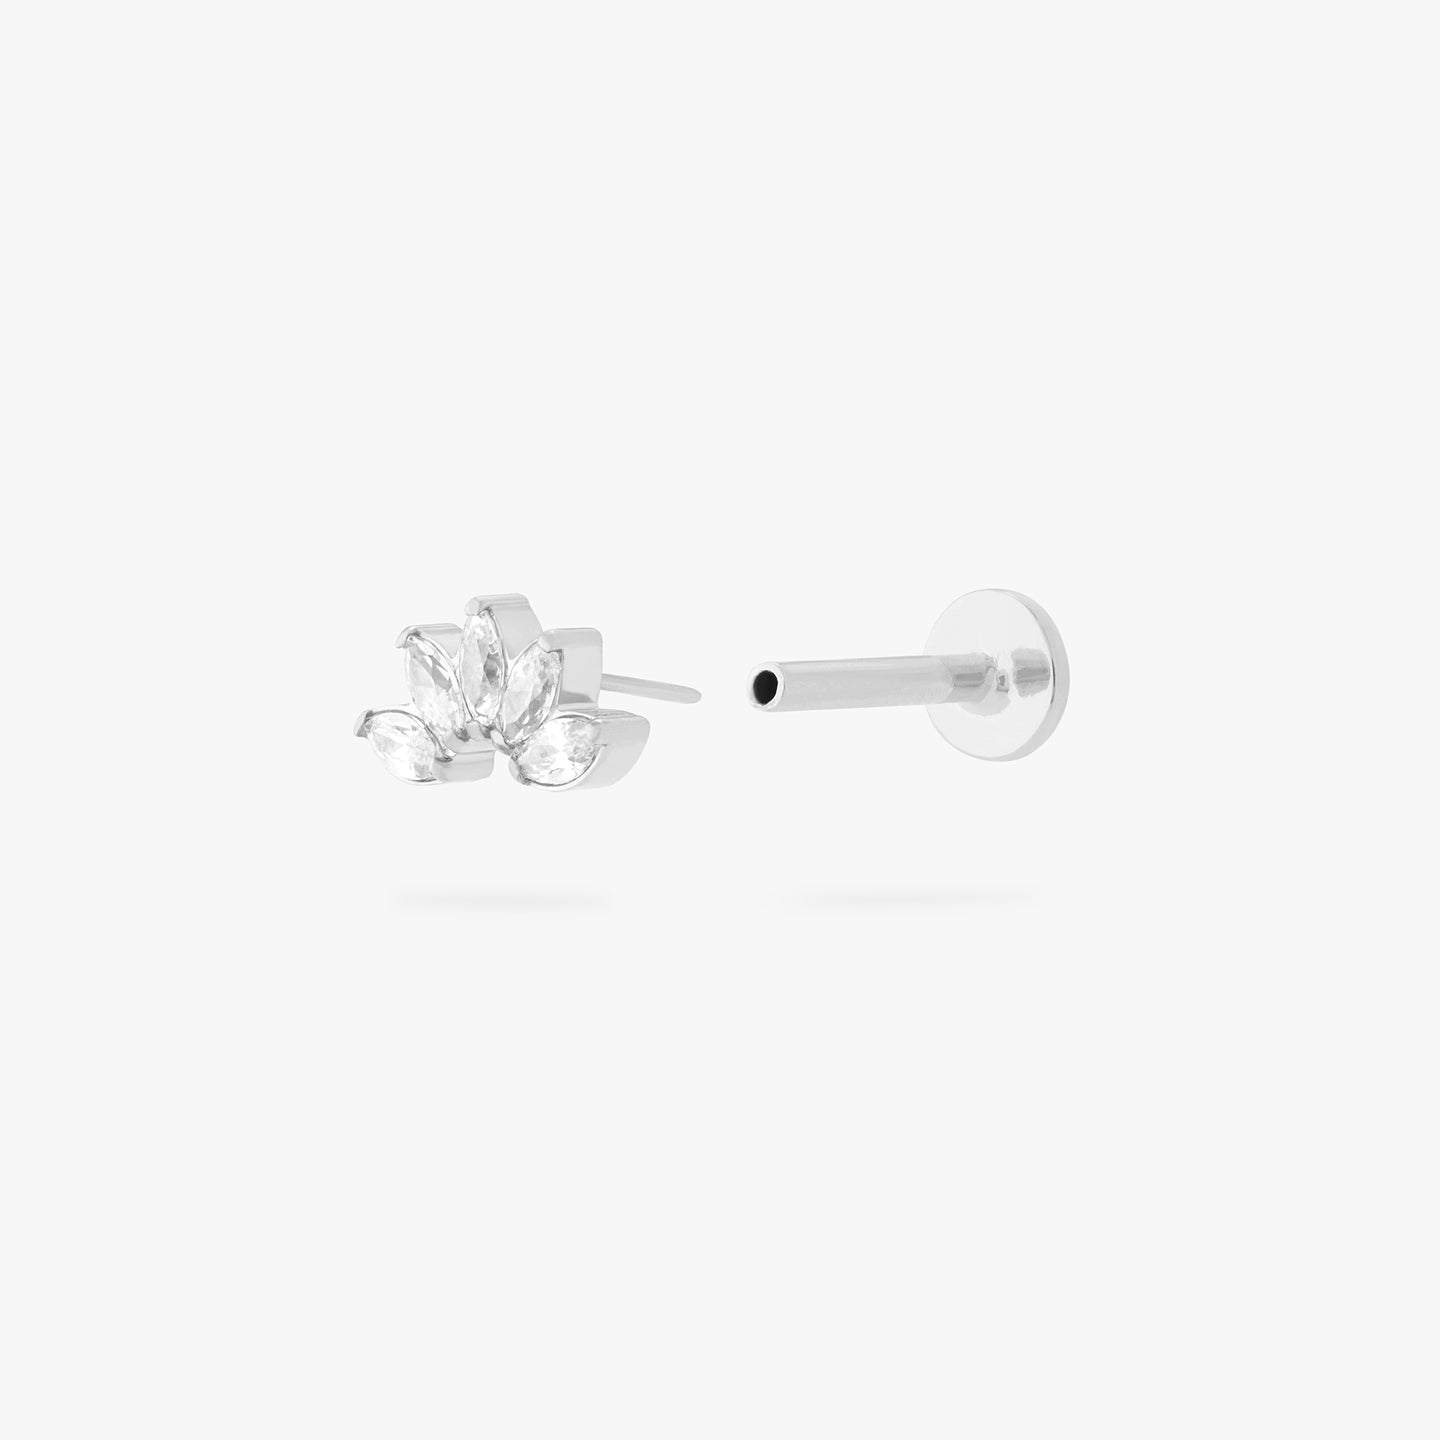 This is an image of a silver/clear crown shaped flatback top that has 5 marquise shaped CZs, with a silver labret that has a circle disc engraved with the 